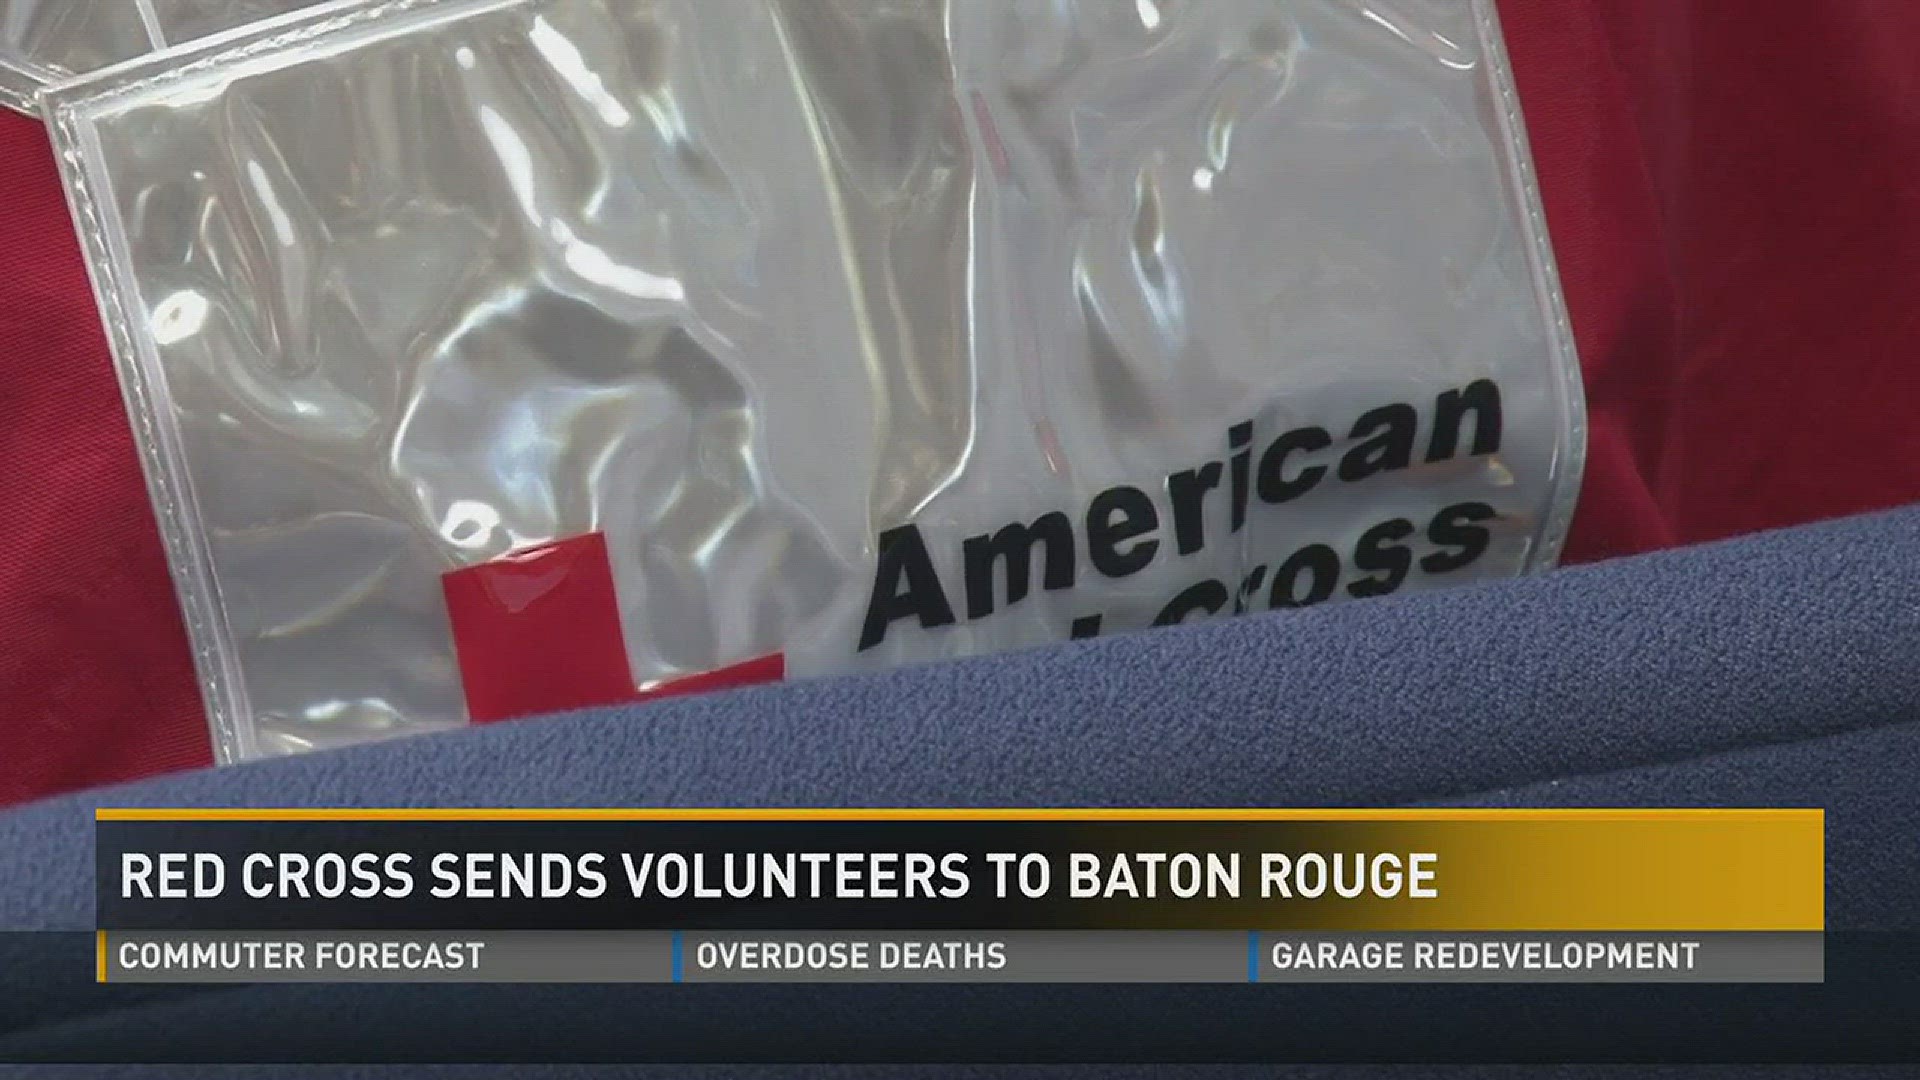 Red Cross is sending a group of Americorps volunteers to Baton Rouge to help in the wake of extensive flooding in Louisiana.